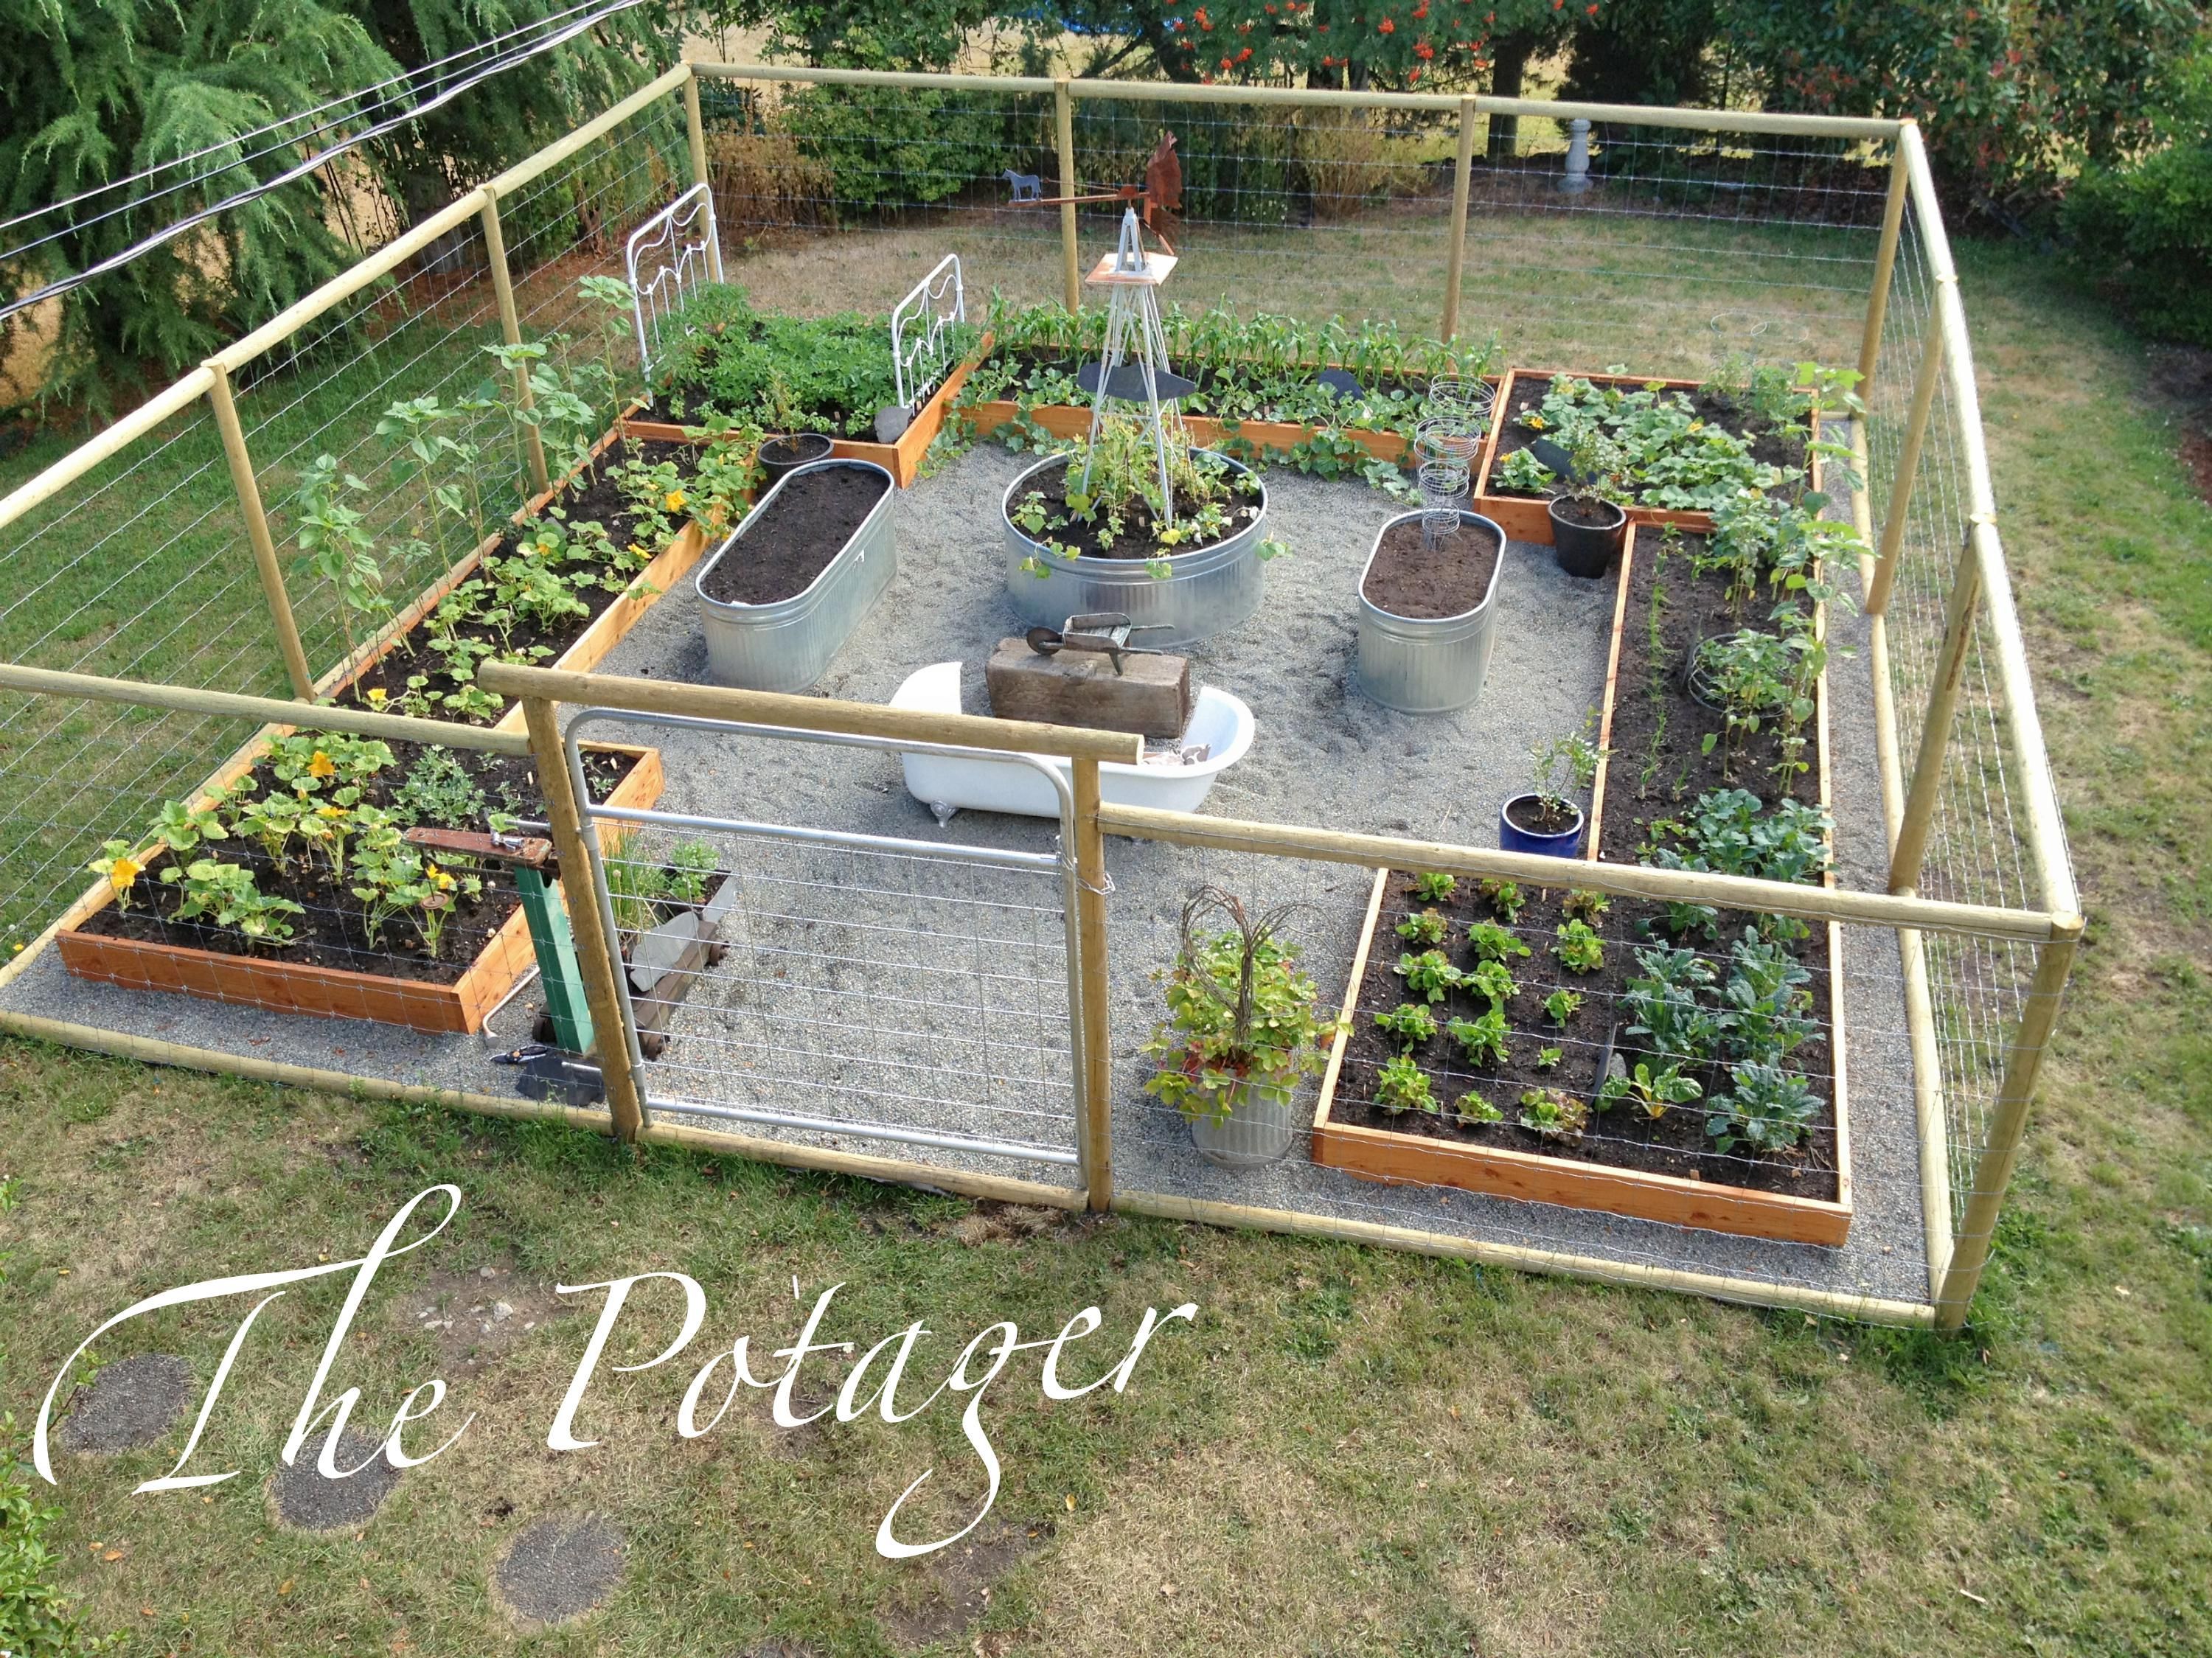 House and Bloom   –  From Grass To Garden presenting… “The Potager”